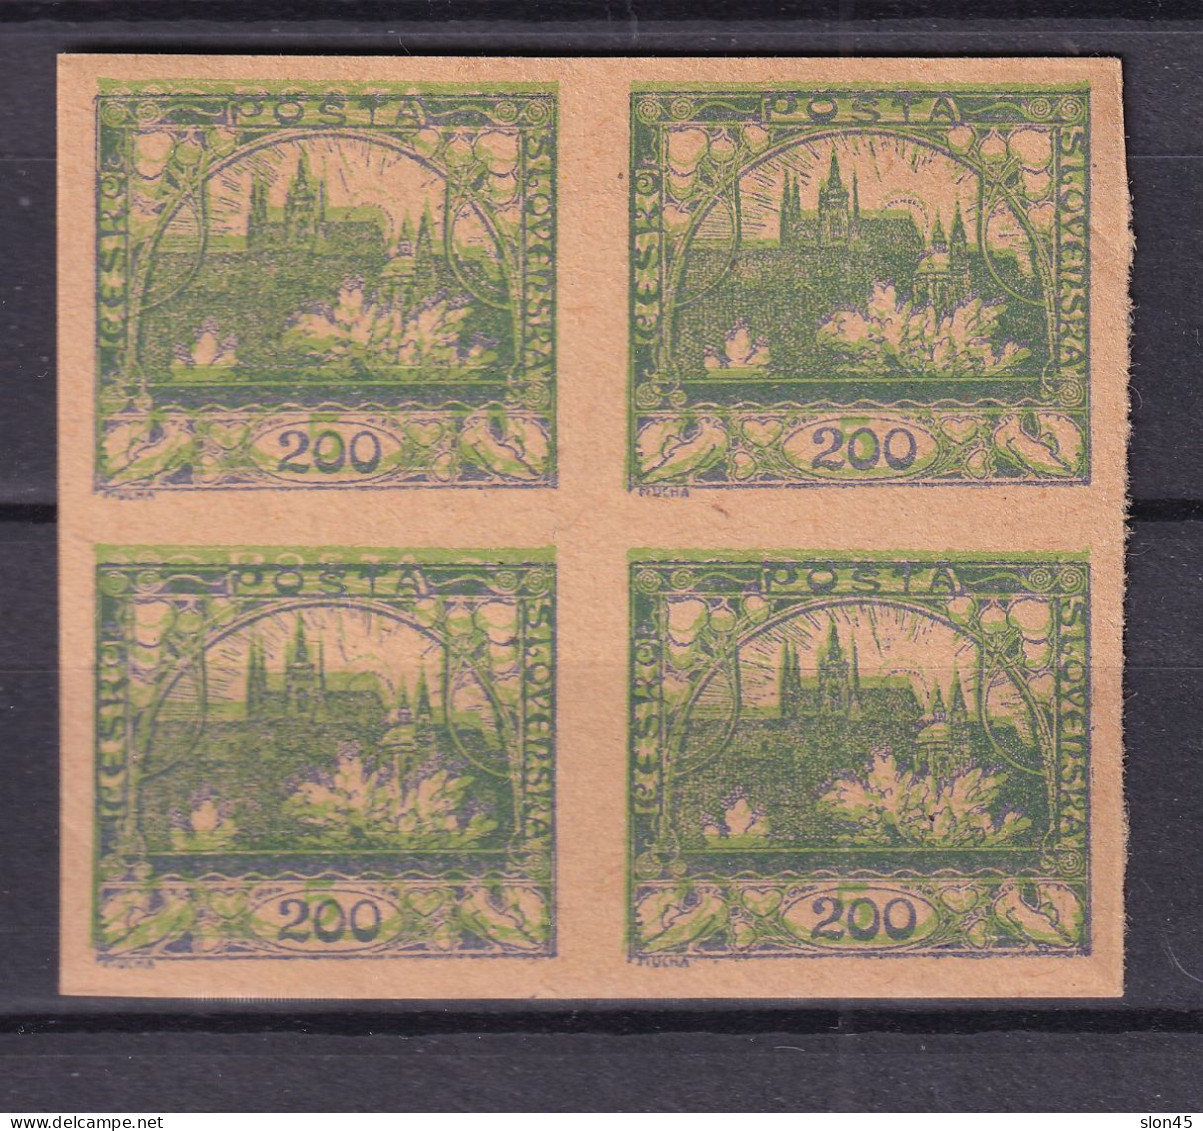 Czechoslovakia 1919 5h Green Imperf Double Print MNG Block Of 4 16080 - Erreurs Sur Timbres